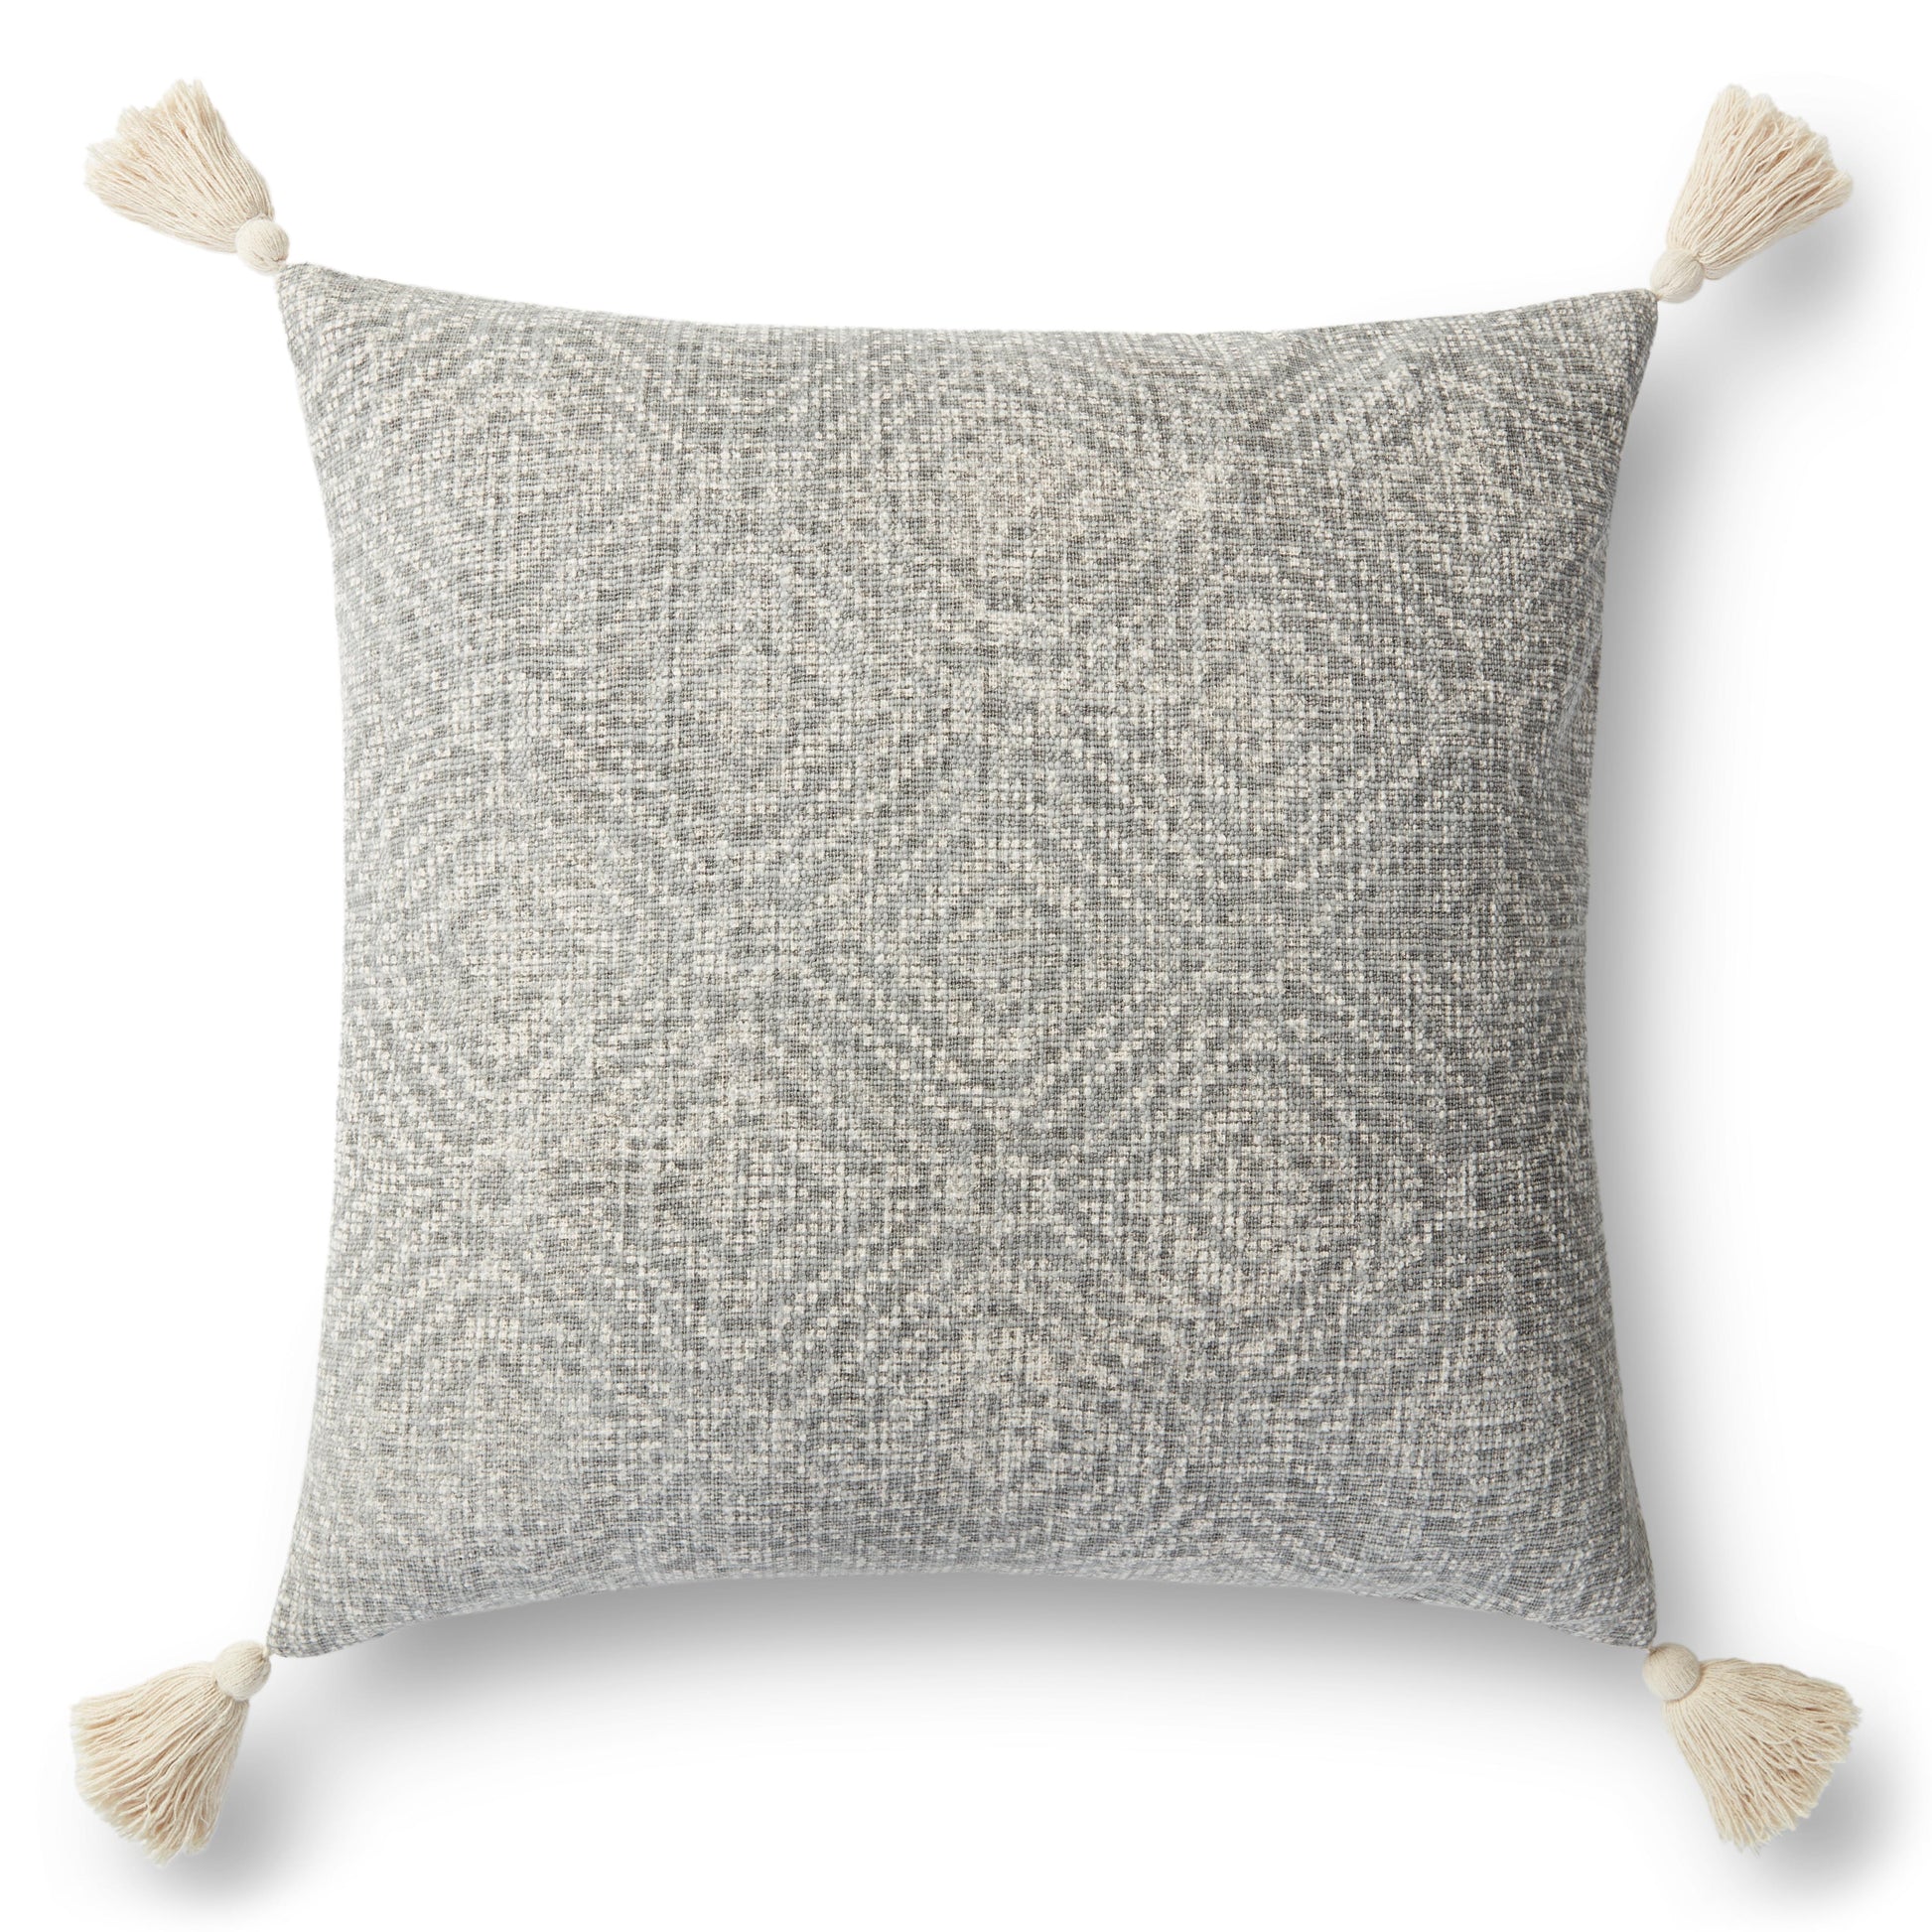 Photo of a pillow;  P0621 Lt Grey 22" x 22" Cover Only Pillow